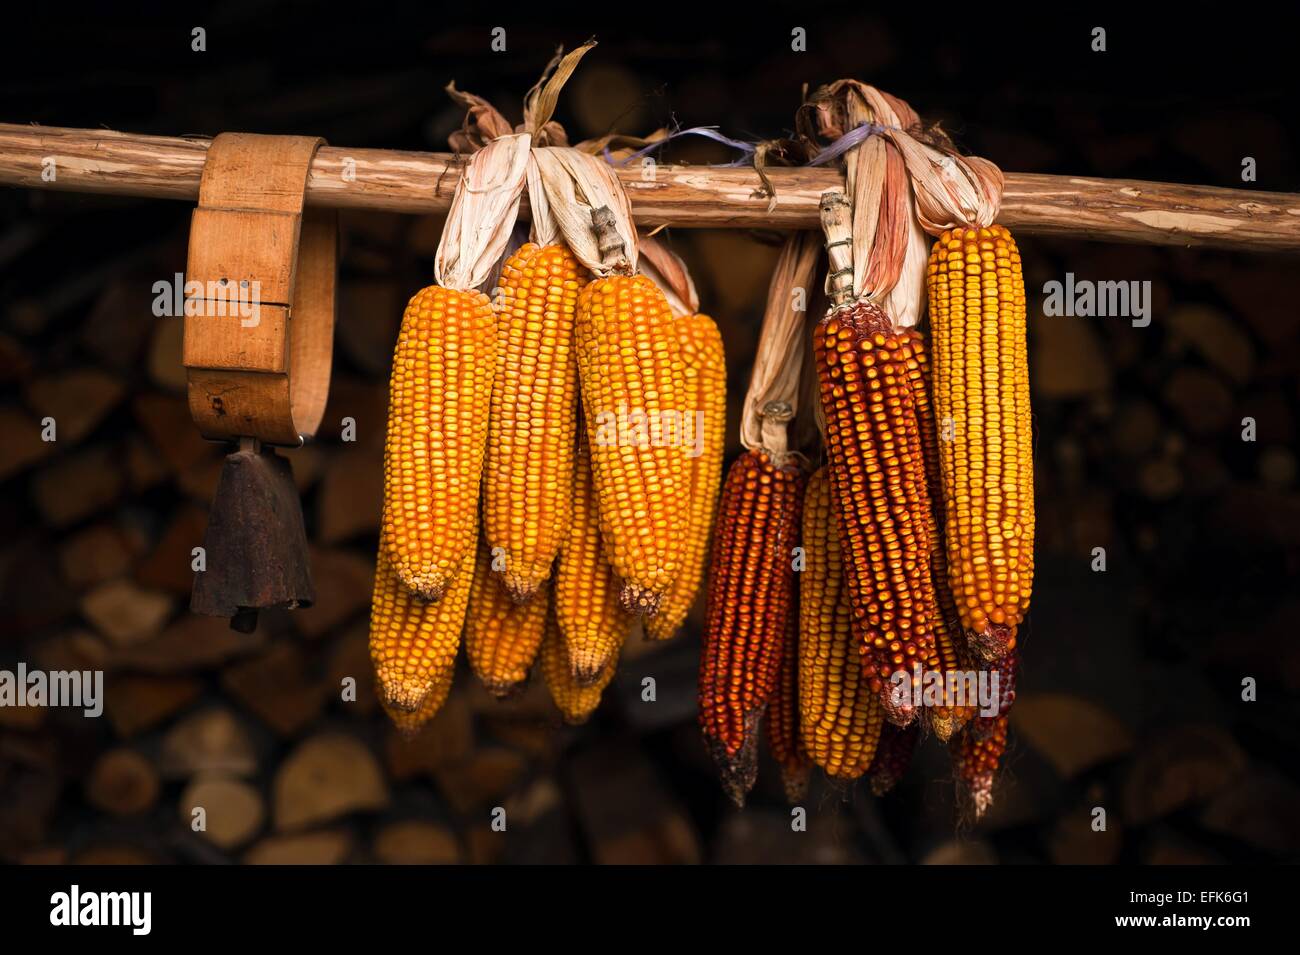 Panicles suspended in drying process Stock Photo